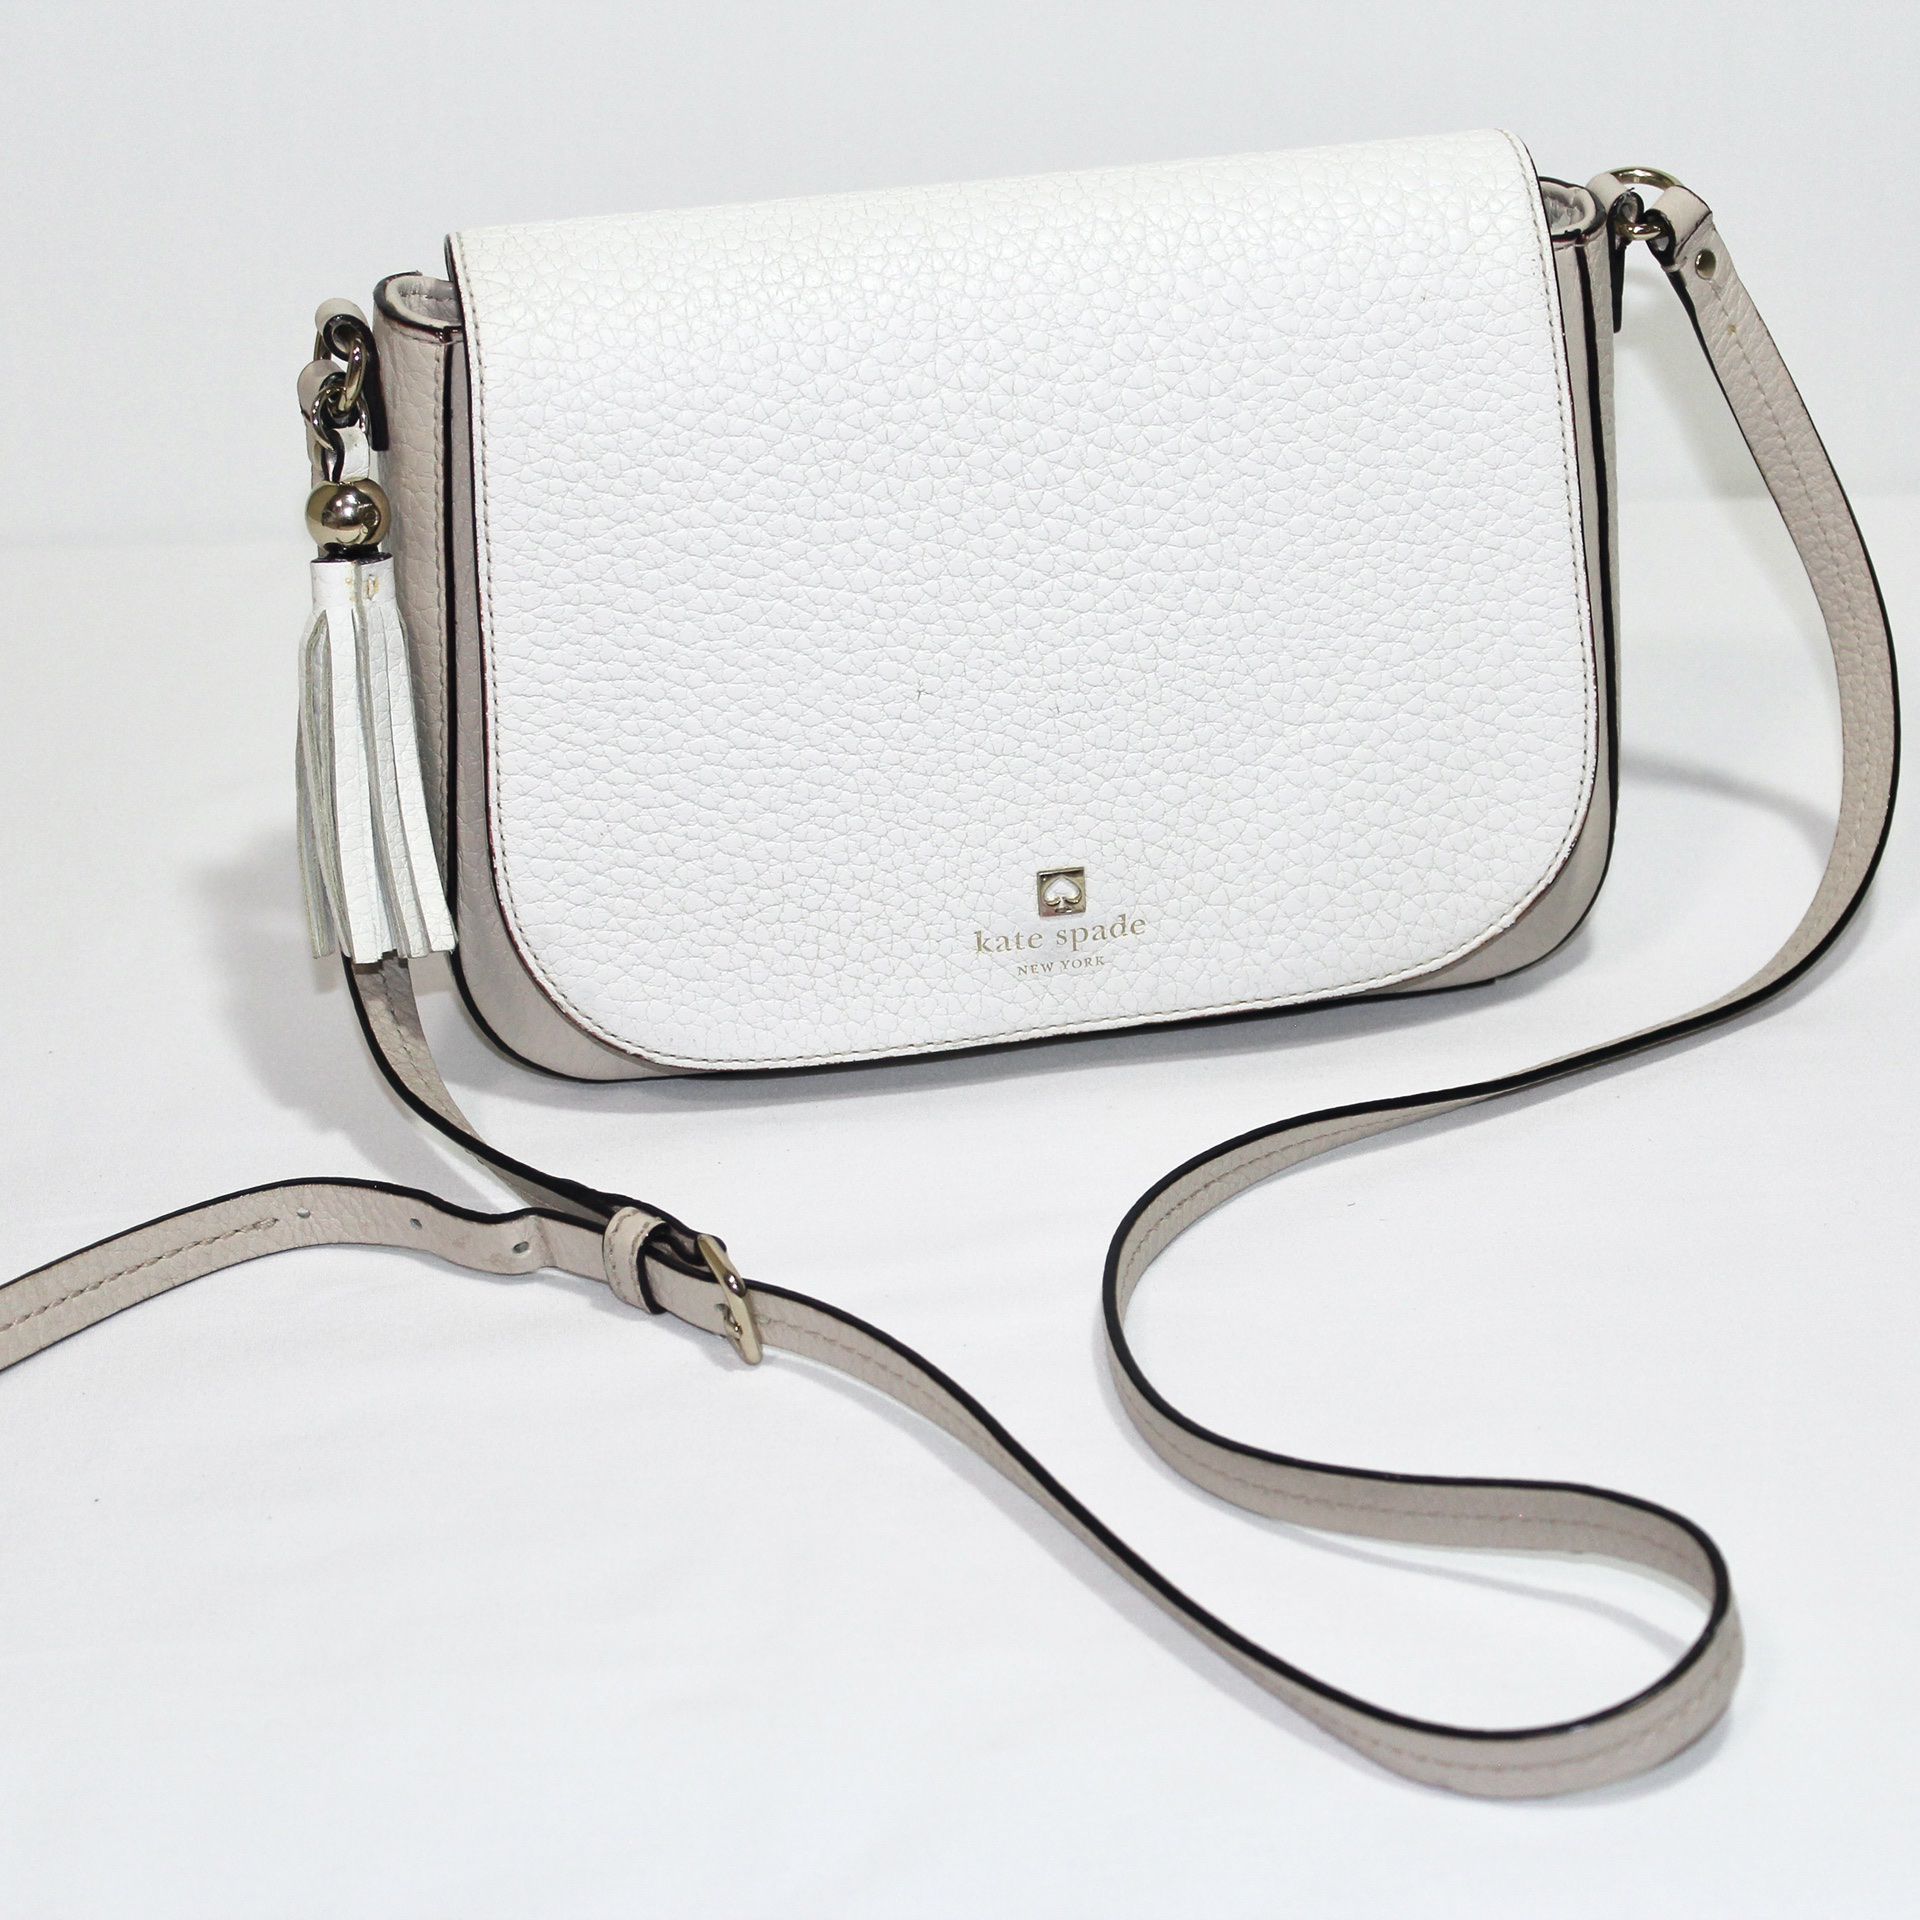 Kate Spade Crossbody Flap Bag in White and Beige